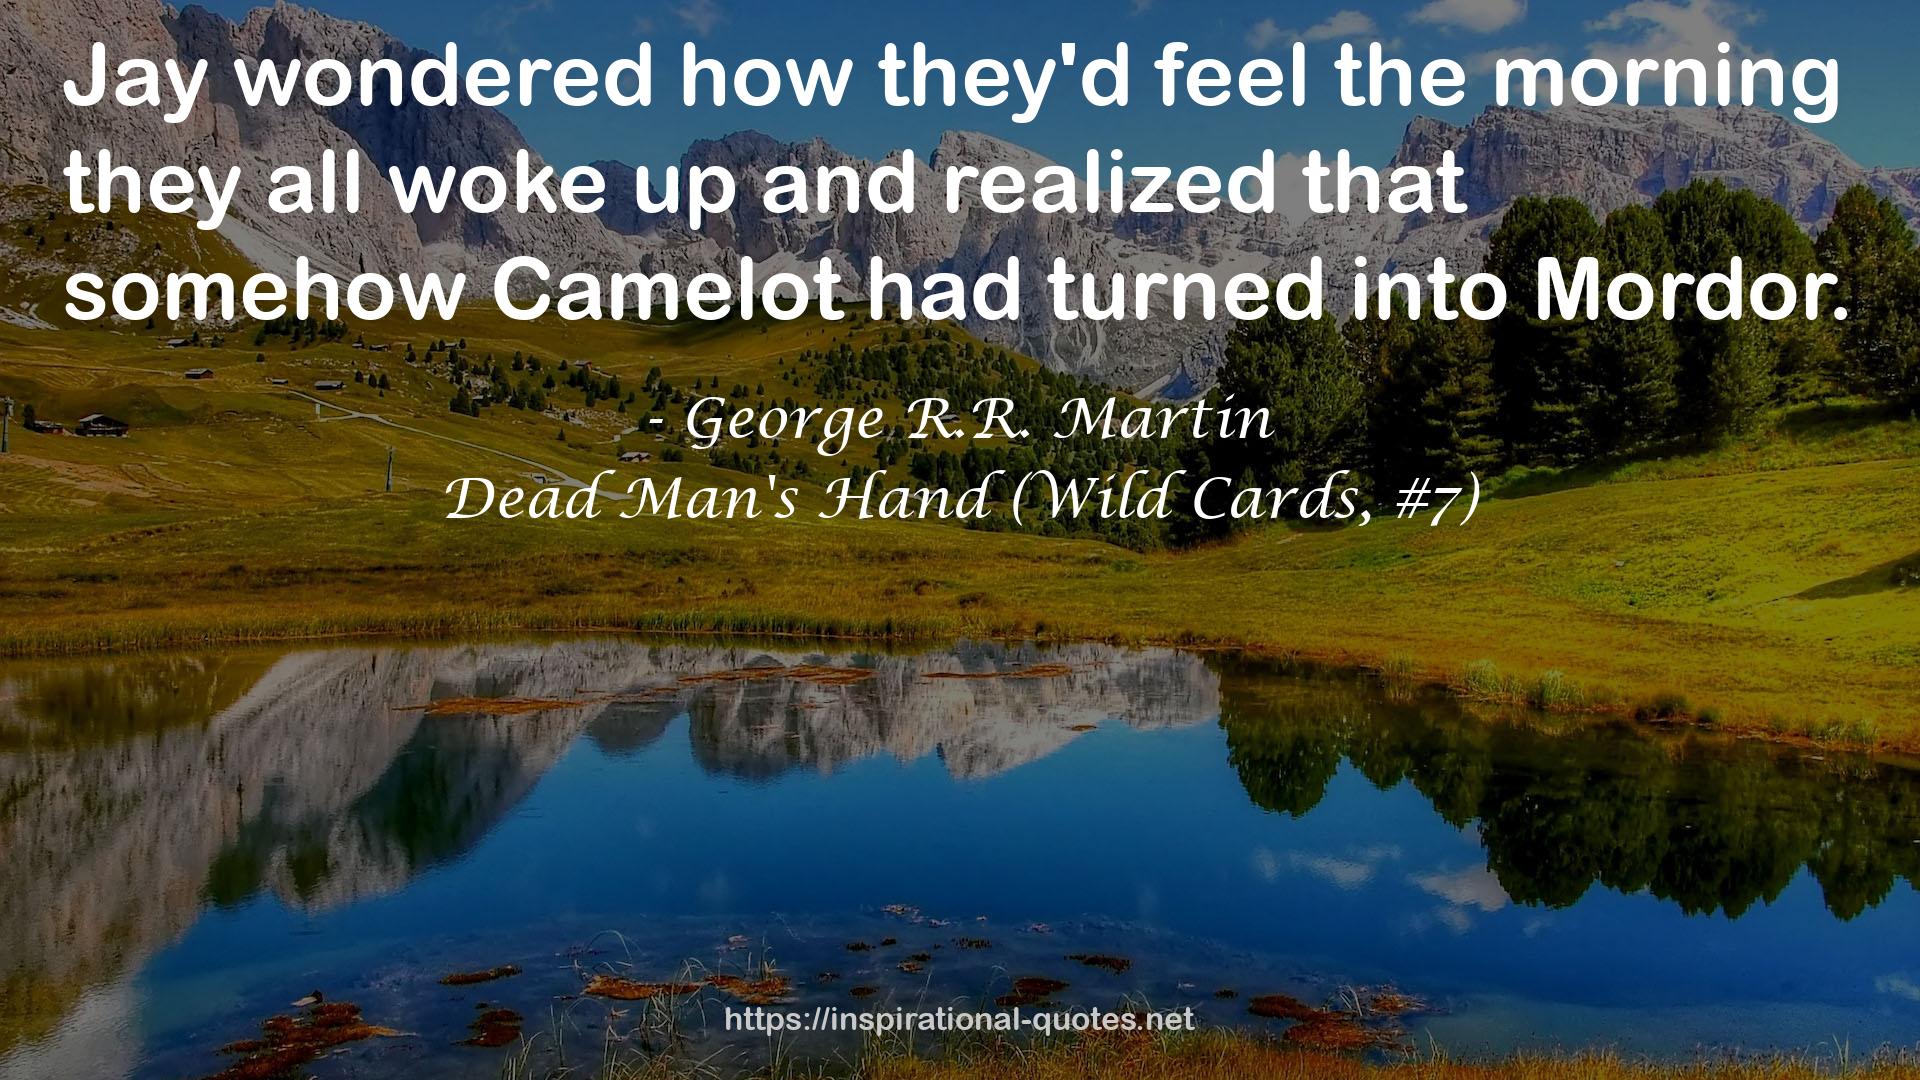 Dead Man's Hand (Wild Cards, #7) QUOTES